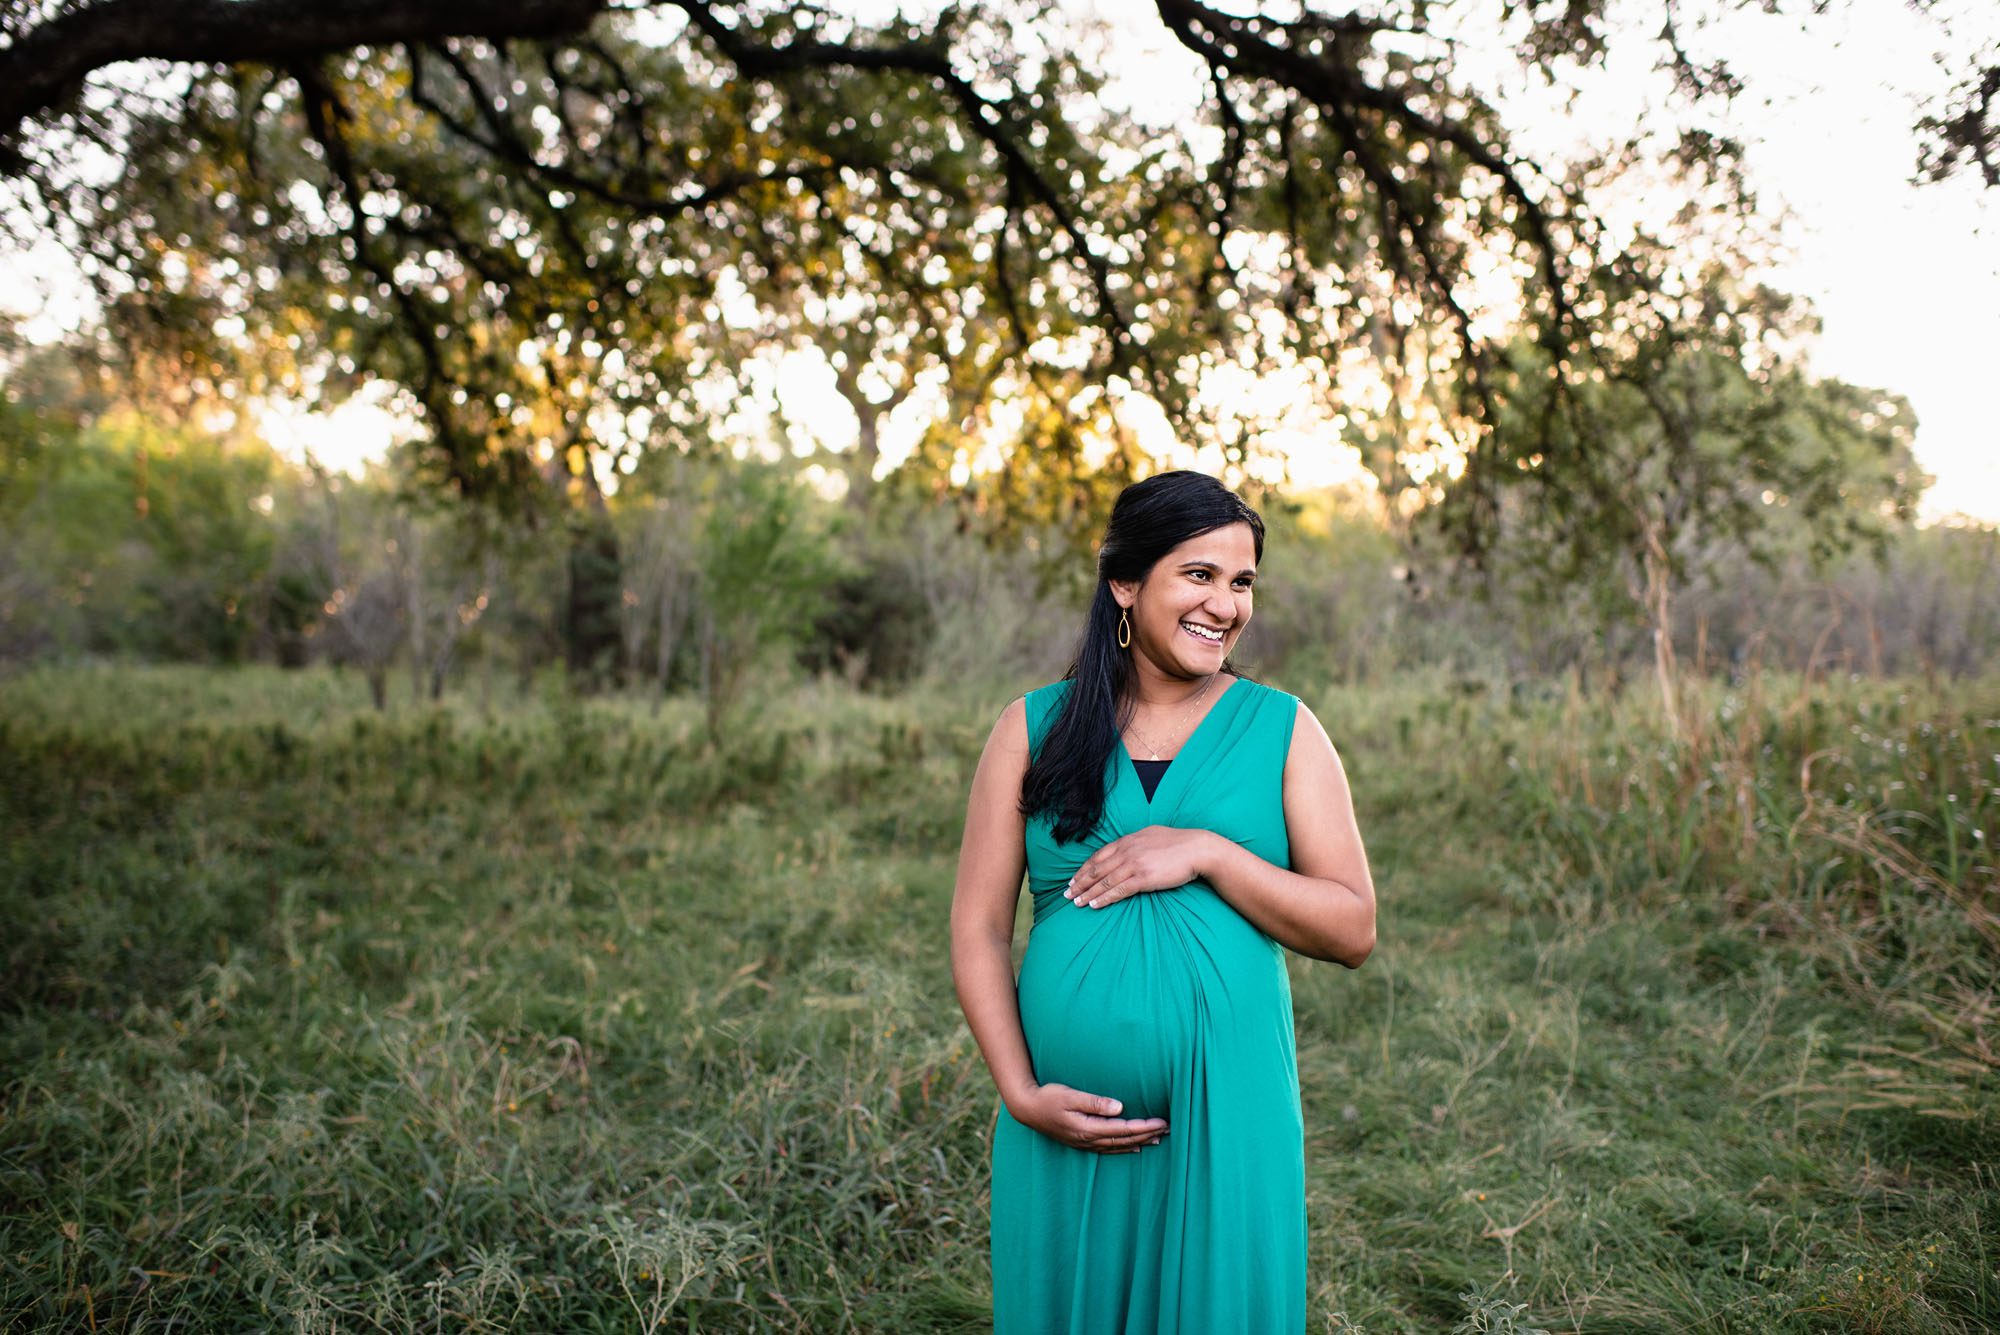 Pregnant woman smiling in green dress, Best San Antonio Maternity Photography